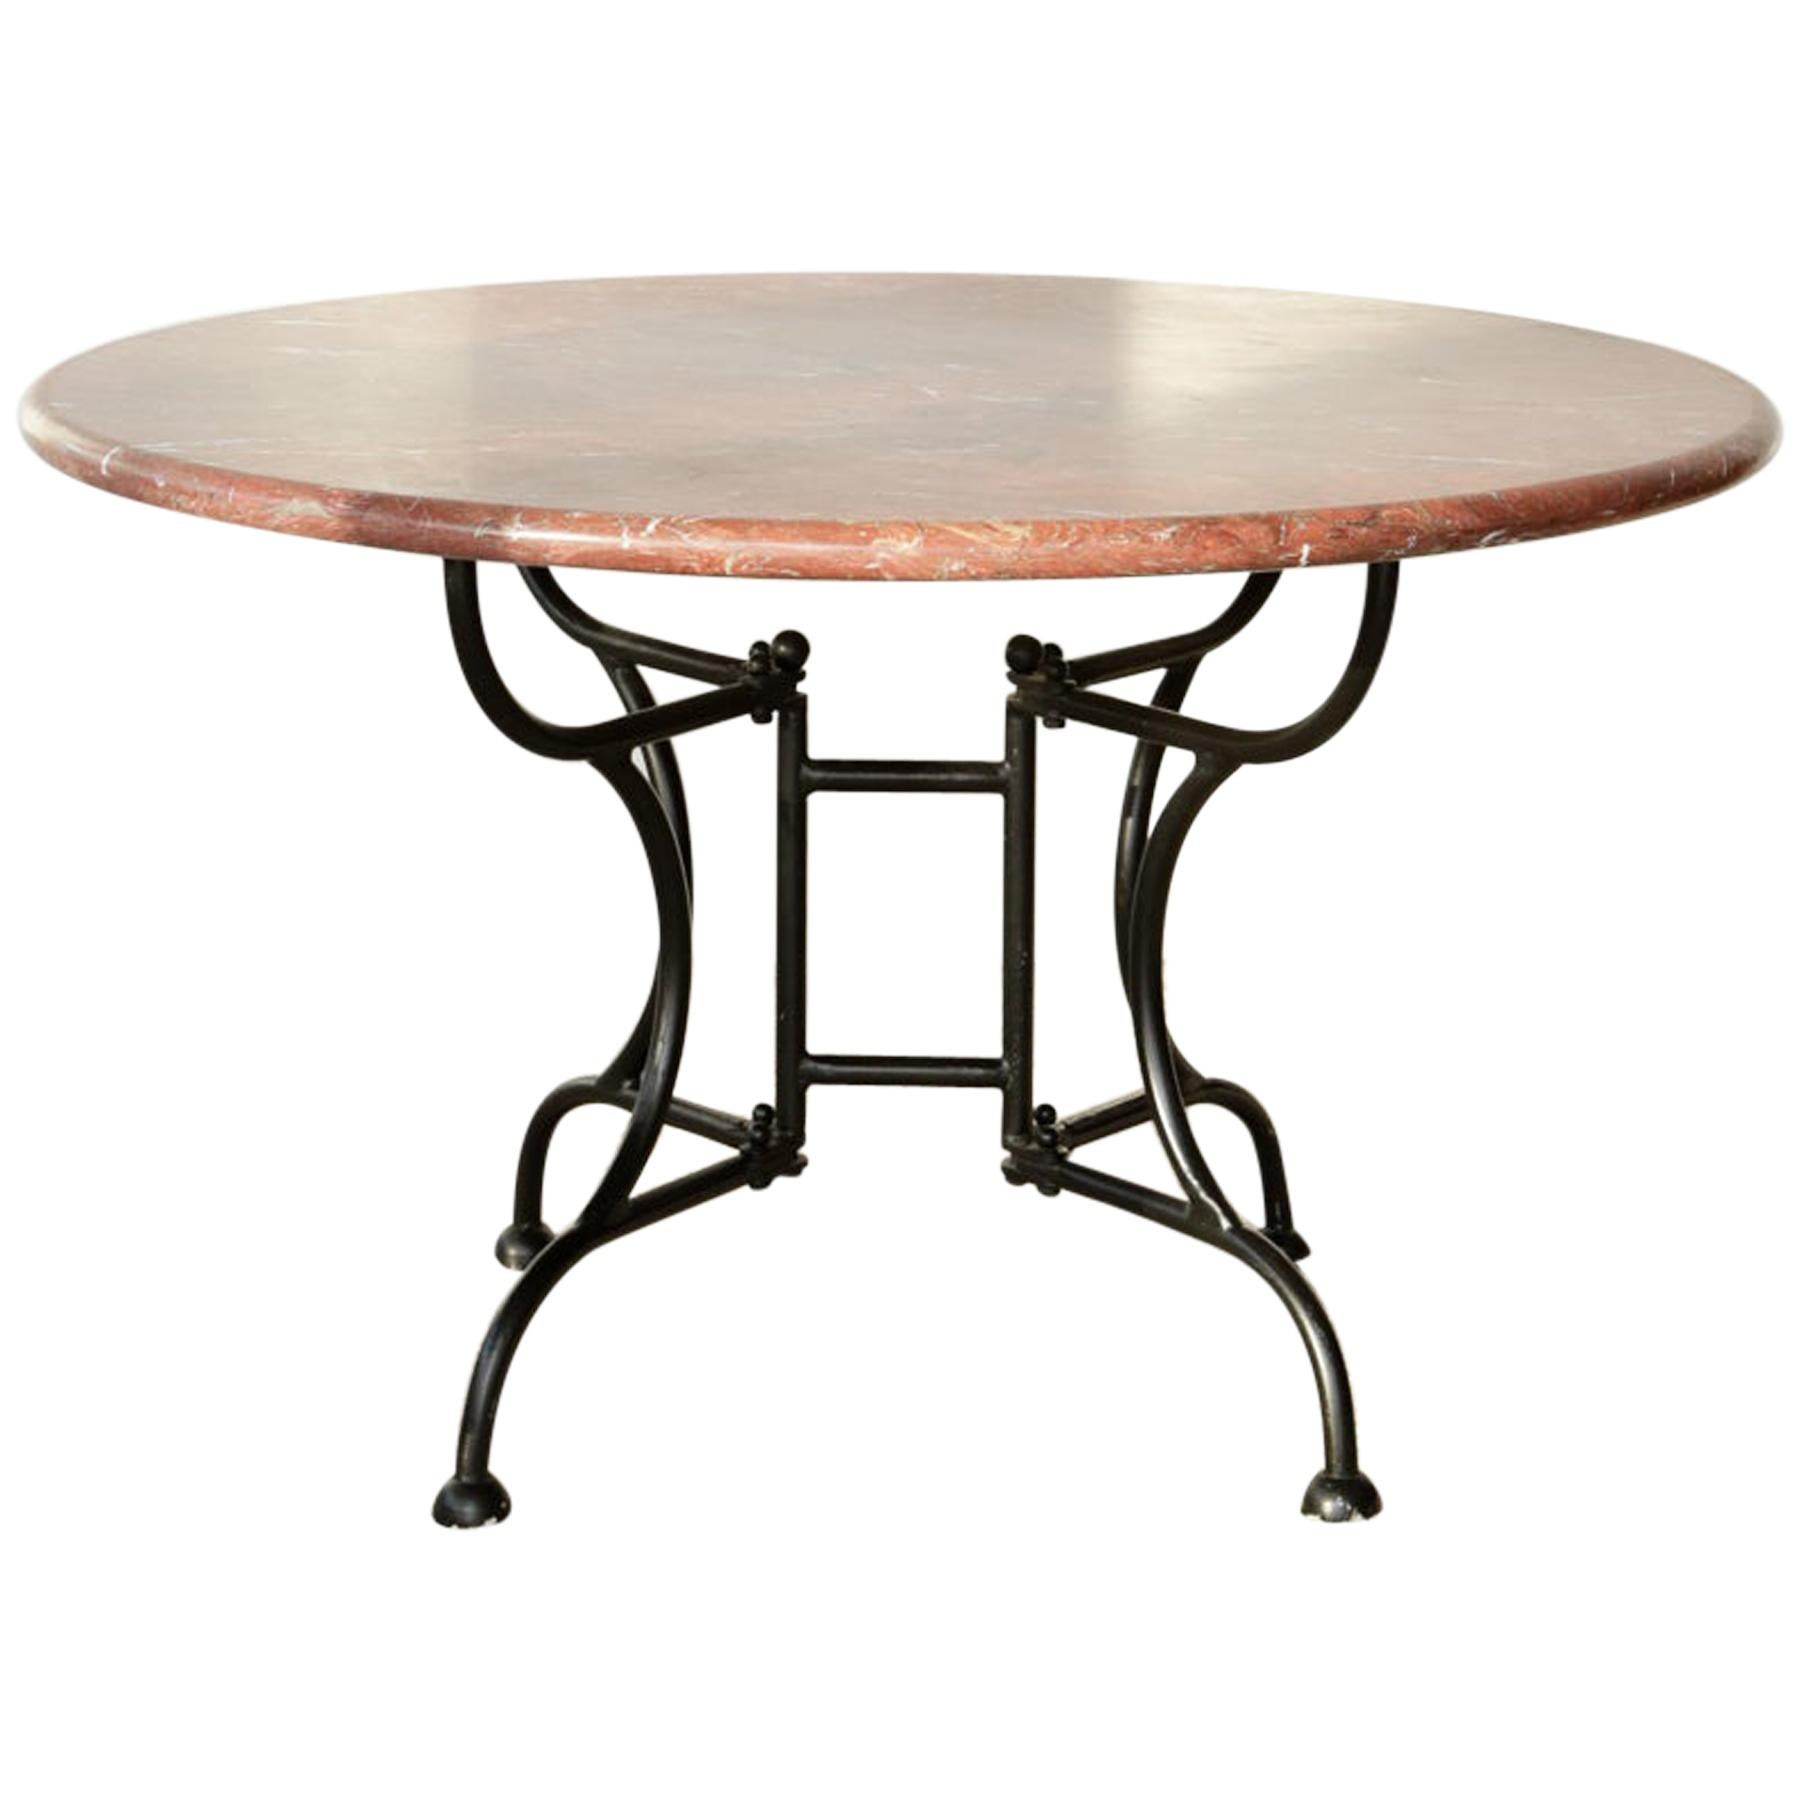 Round Burgundy Marble Table with Cast Iron Legs